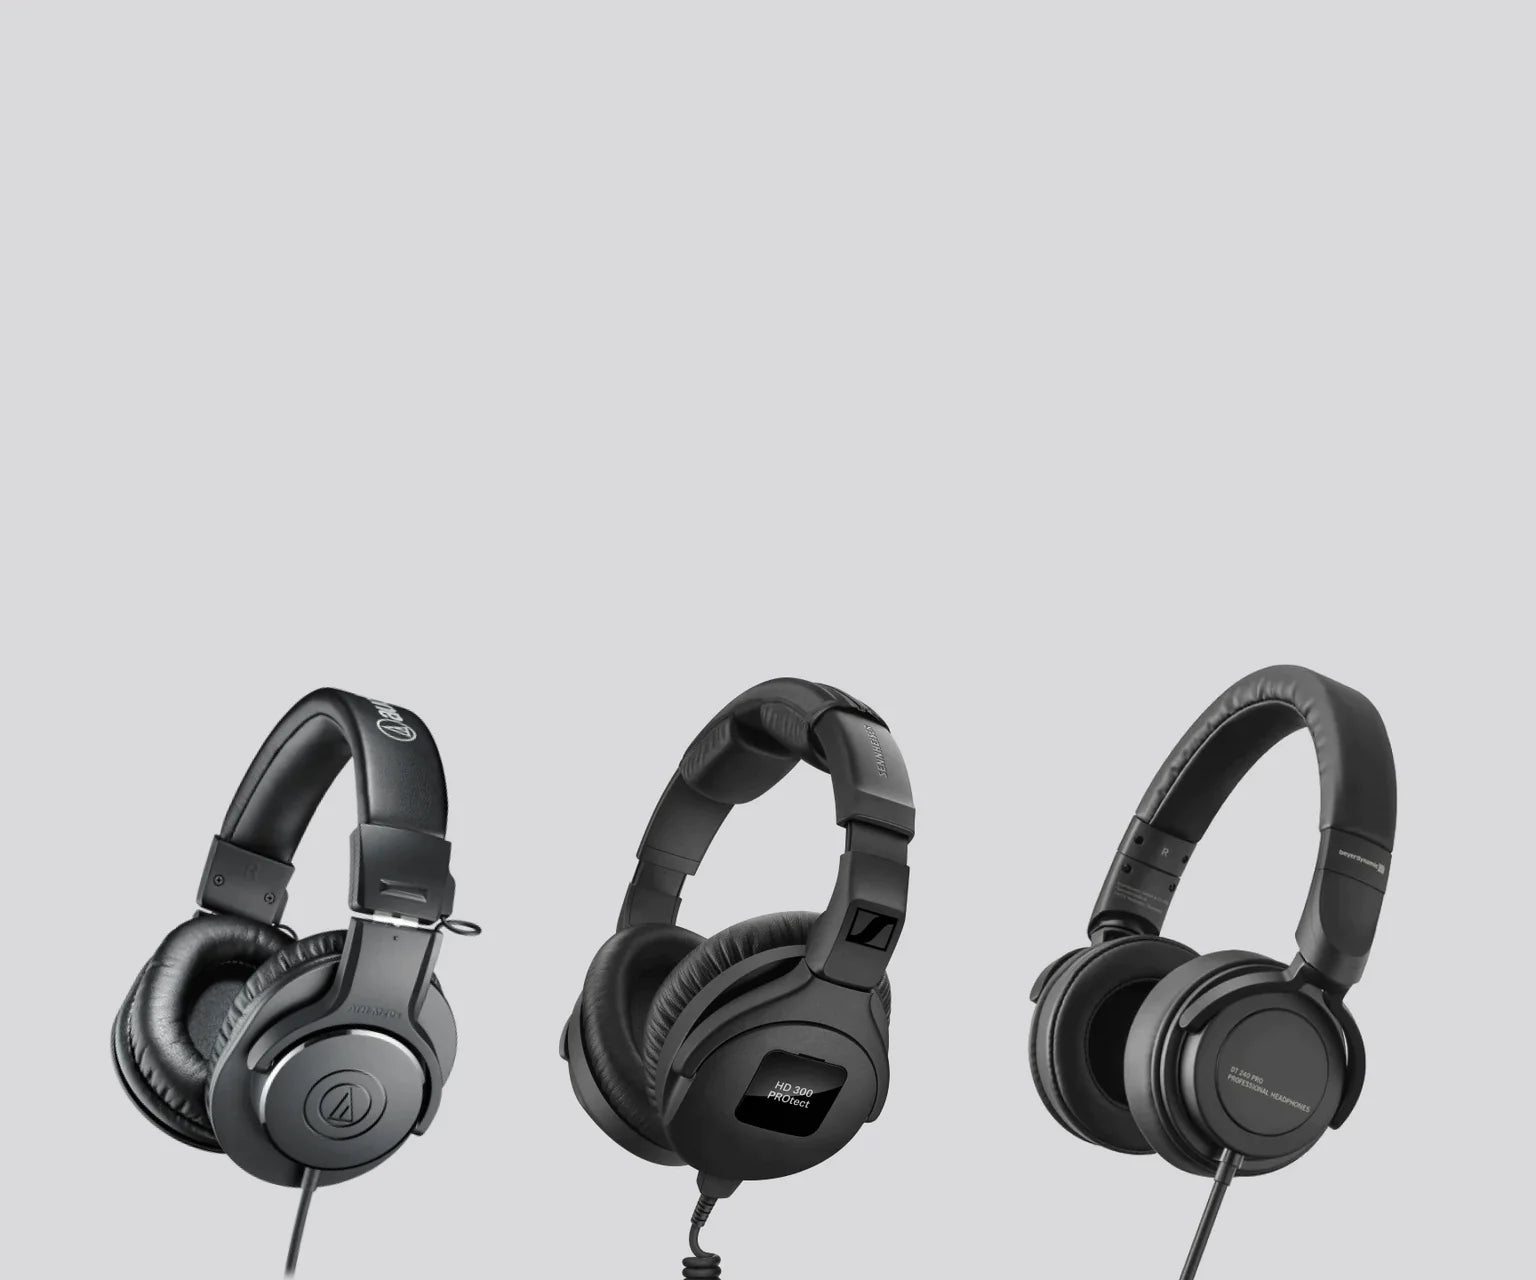 Individually calibrated headphones | For extra precision